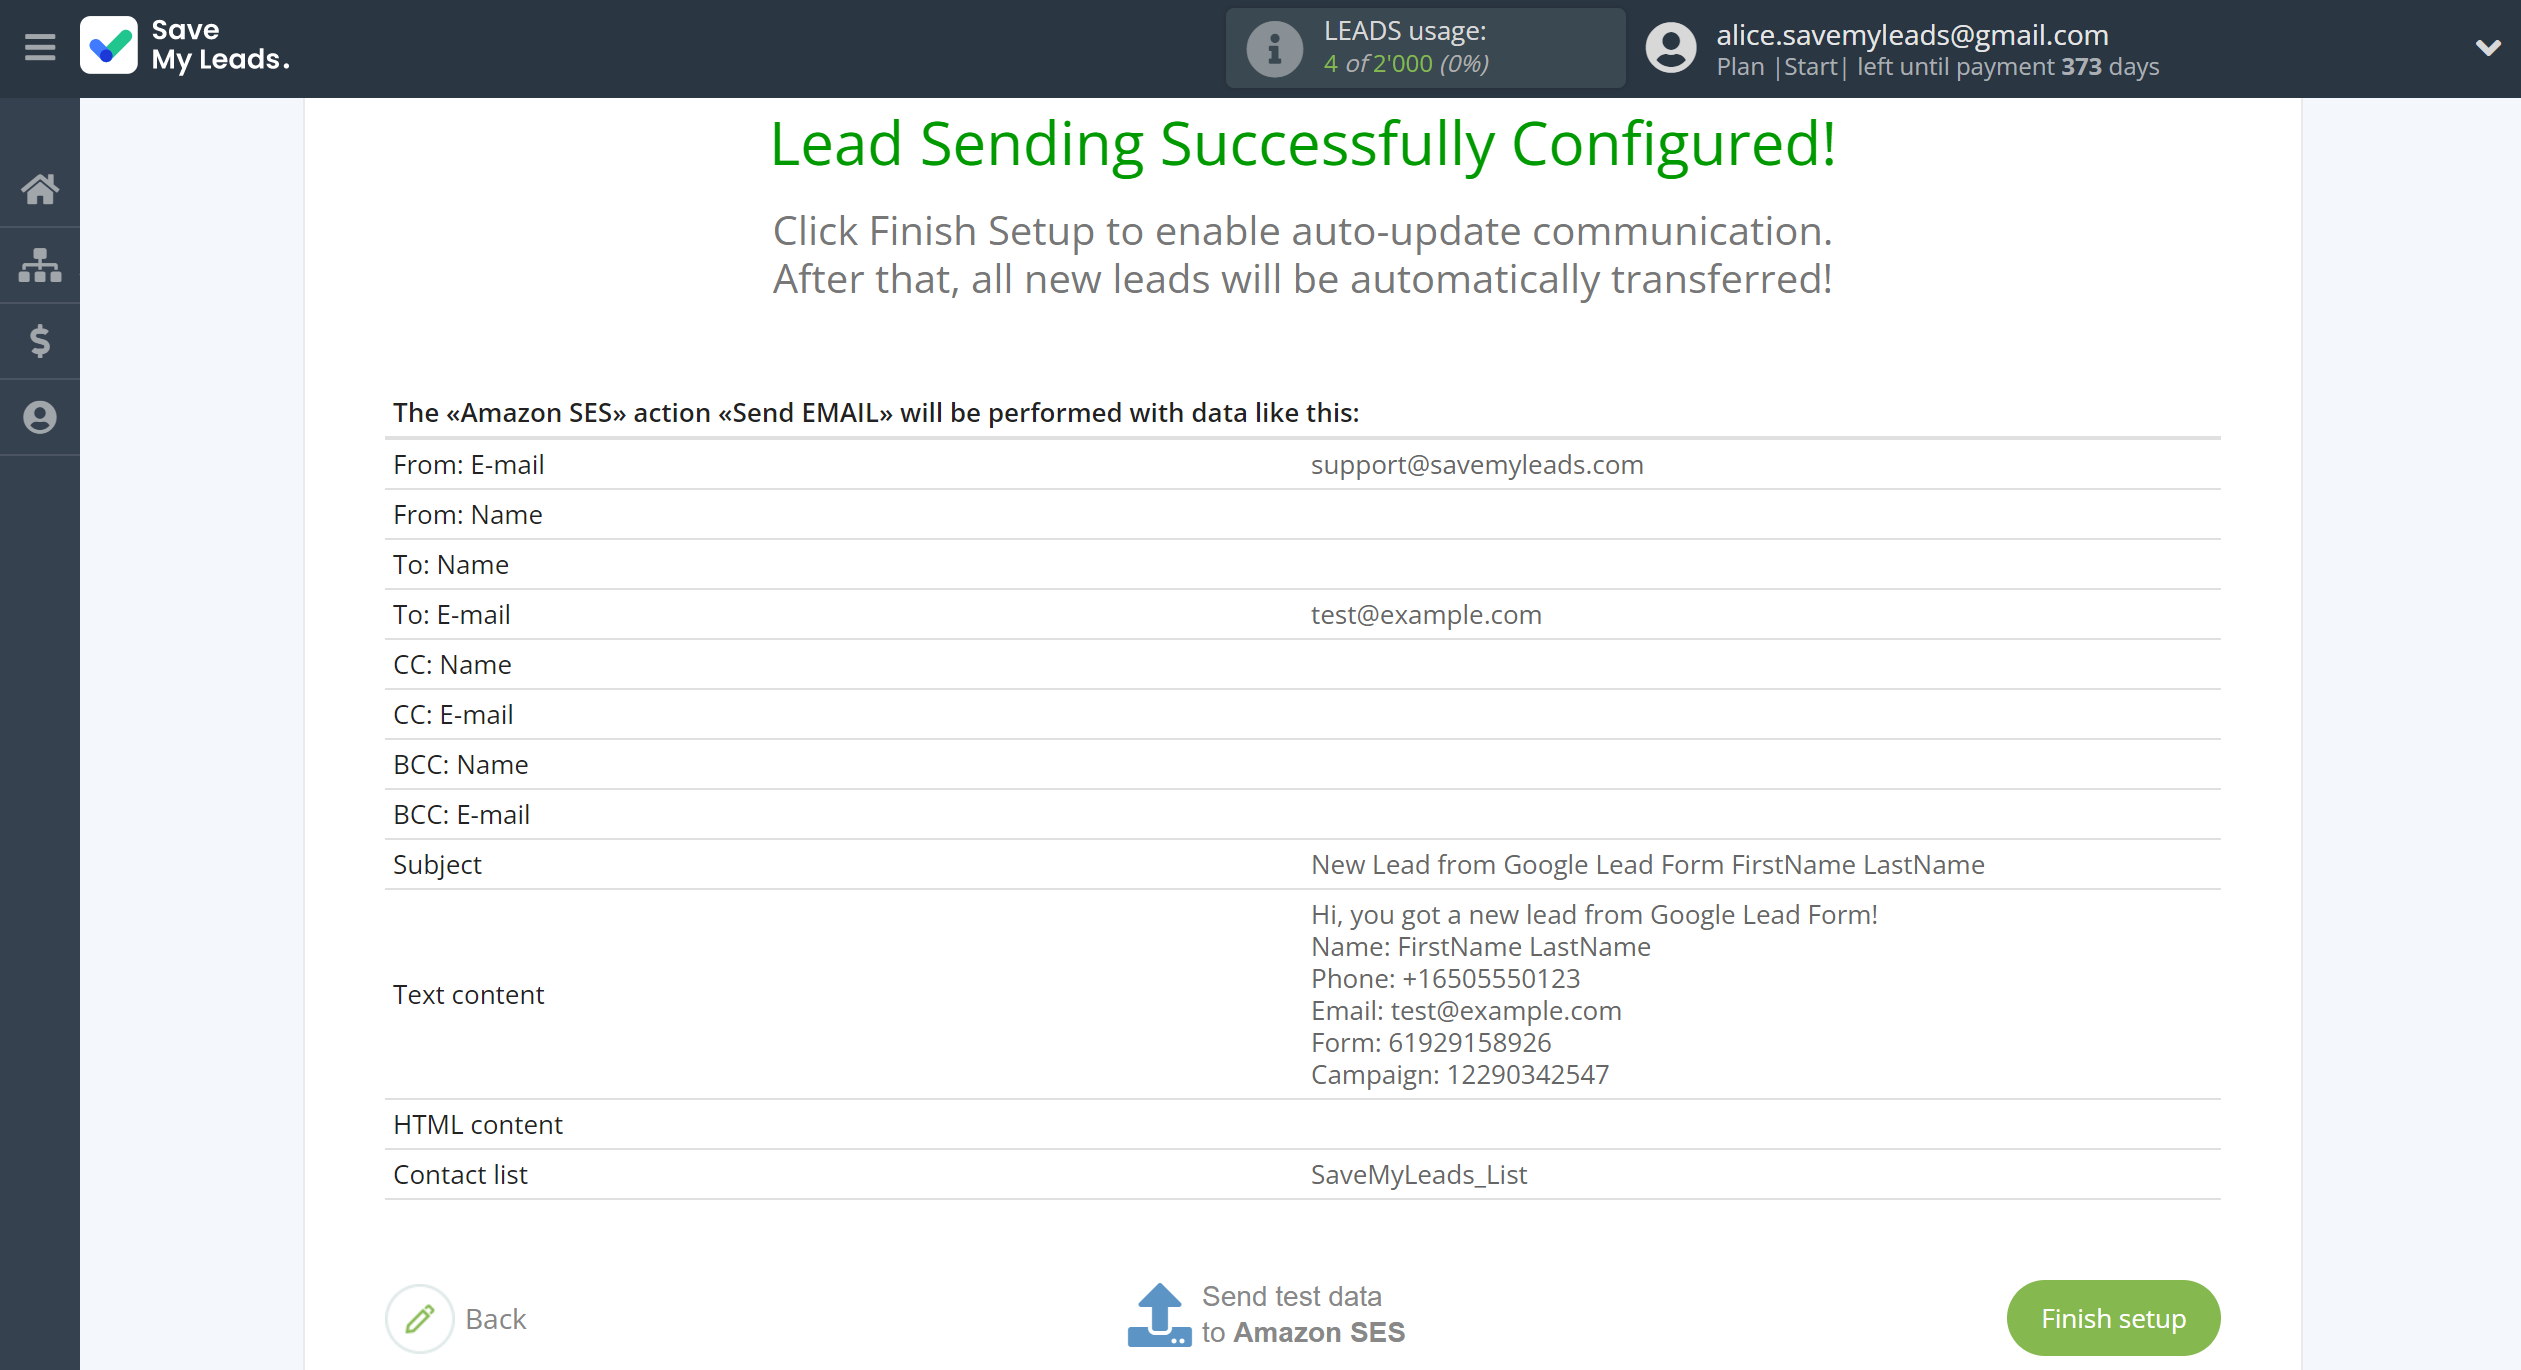 How to Connect Google Lead Form with Amazon SES | Test data